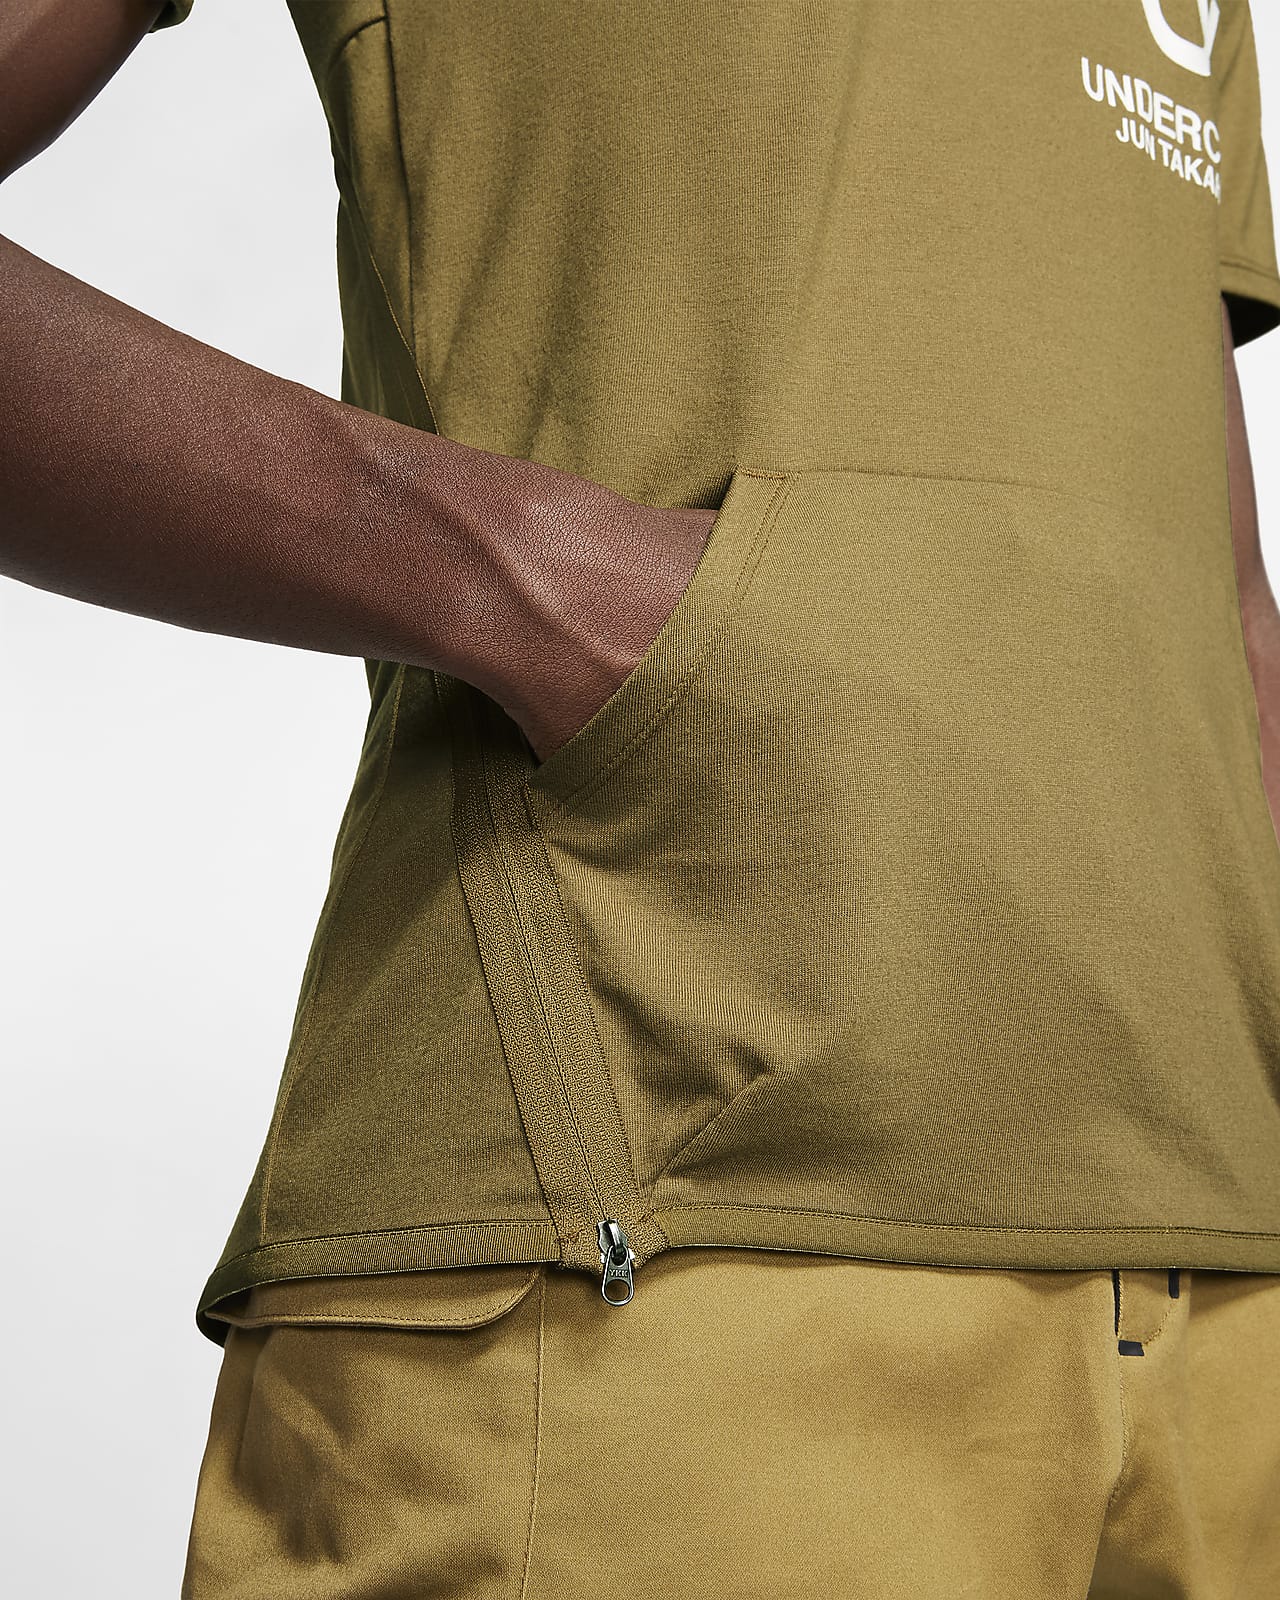 nike x undercover pocket top